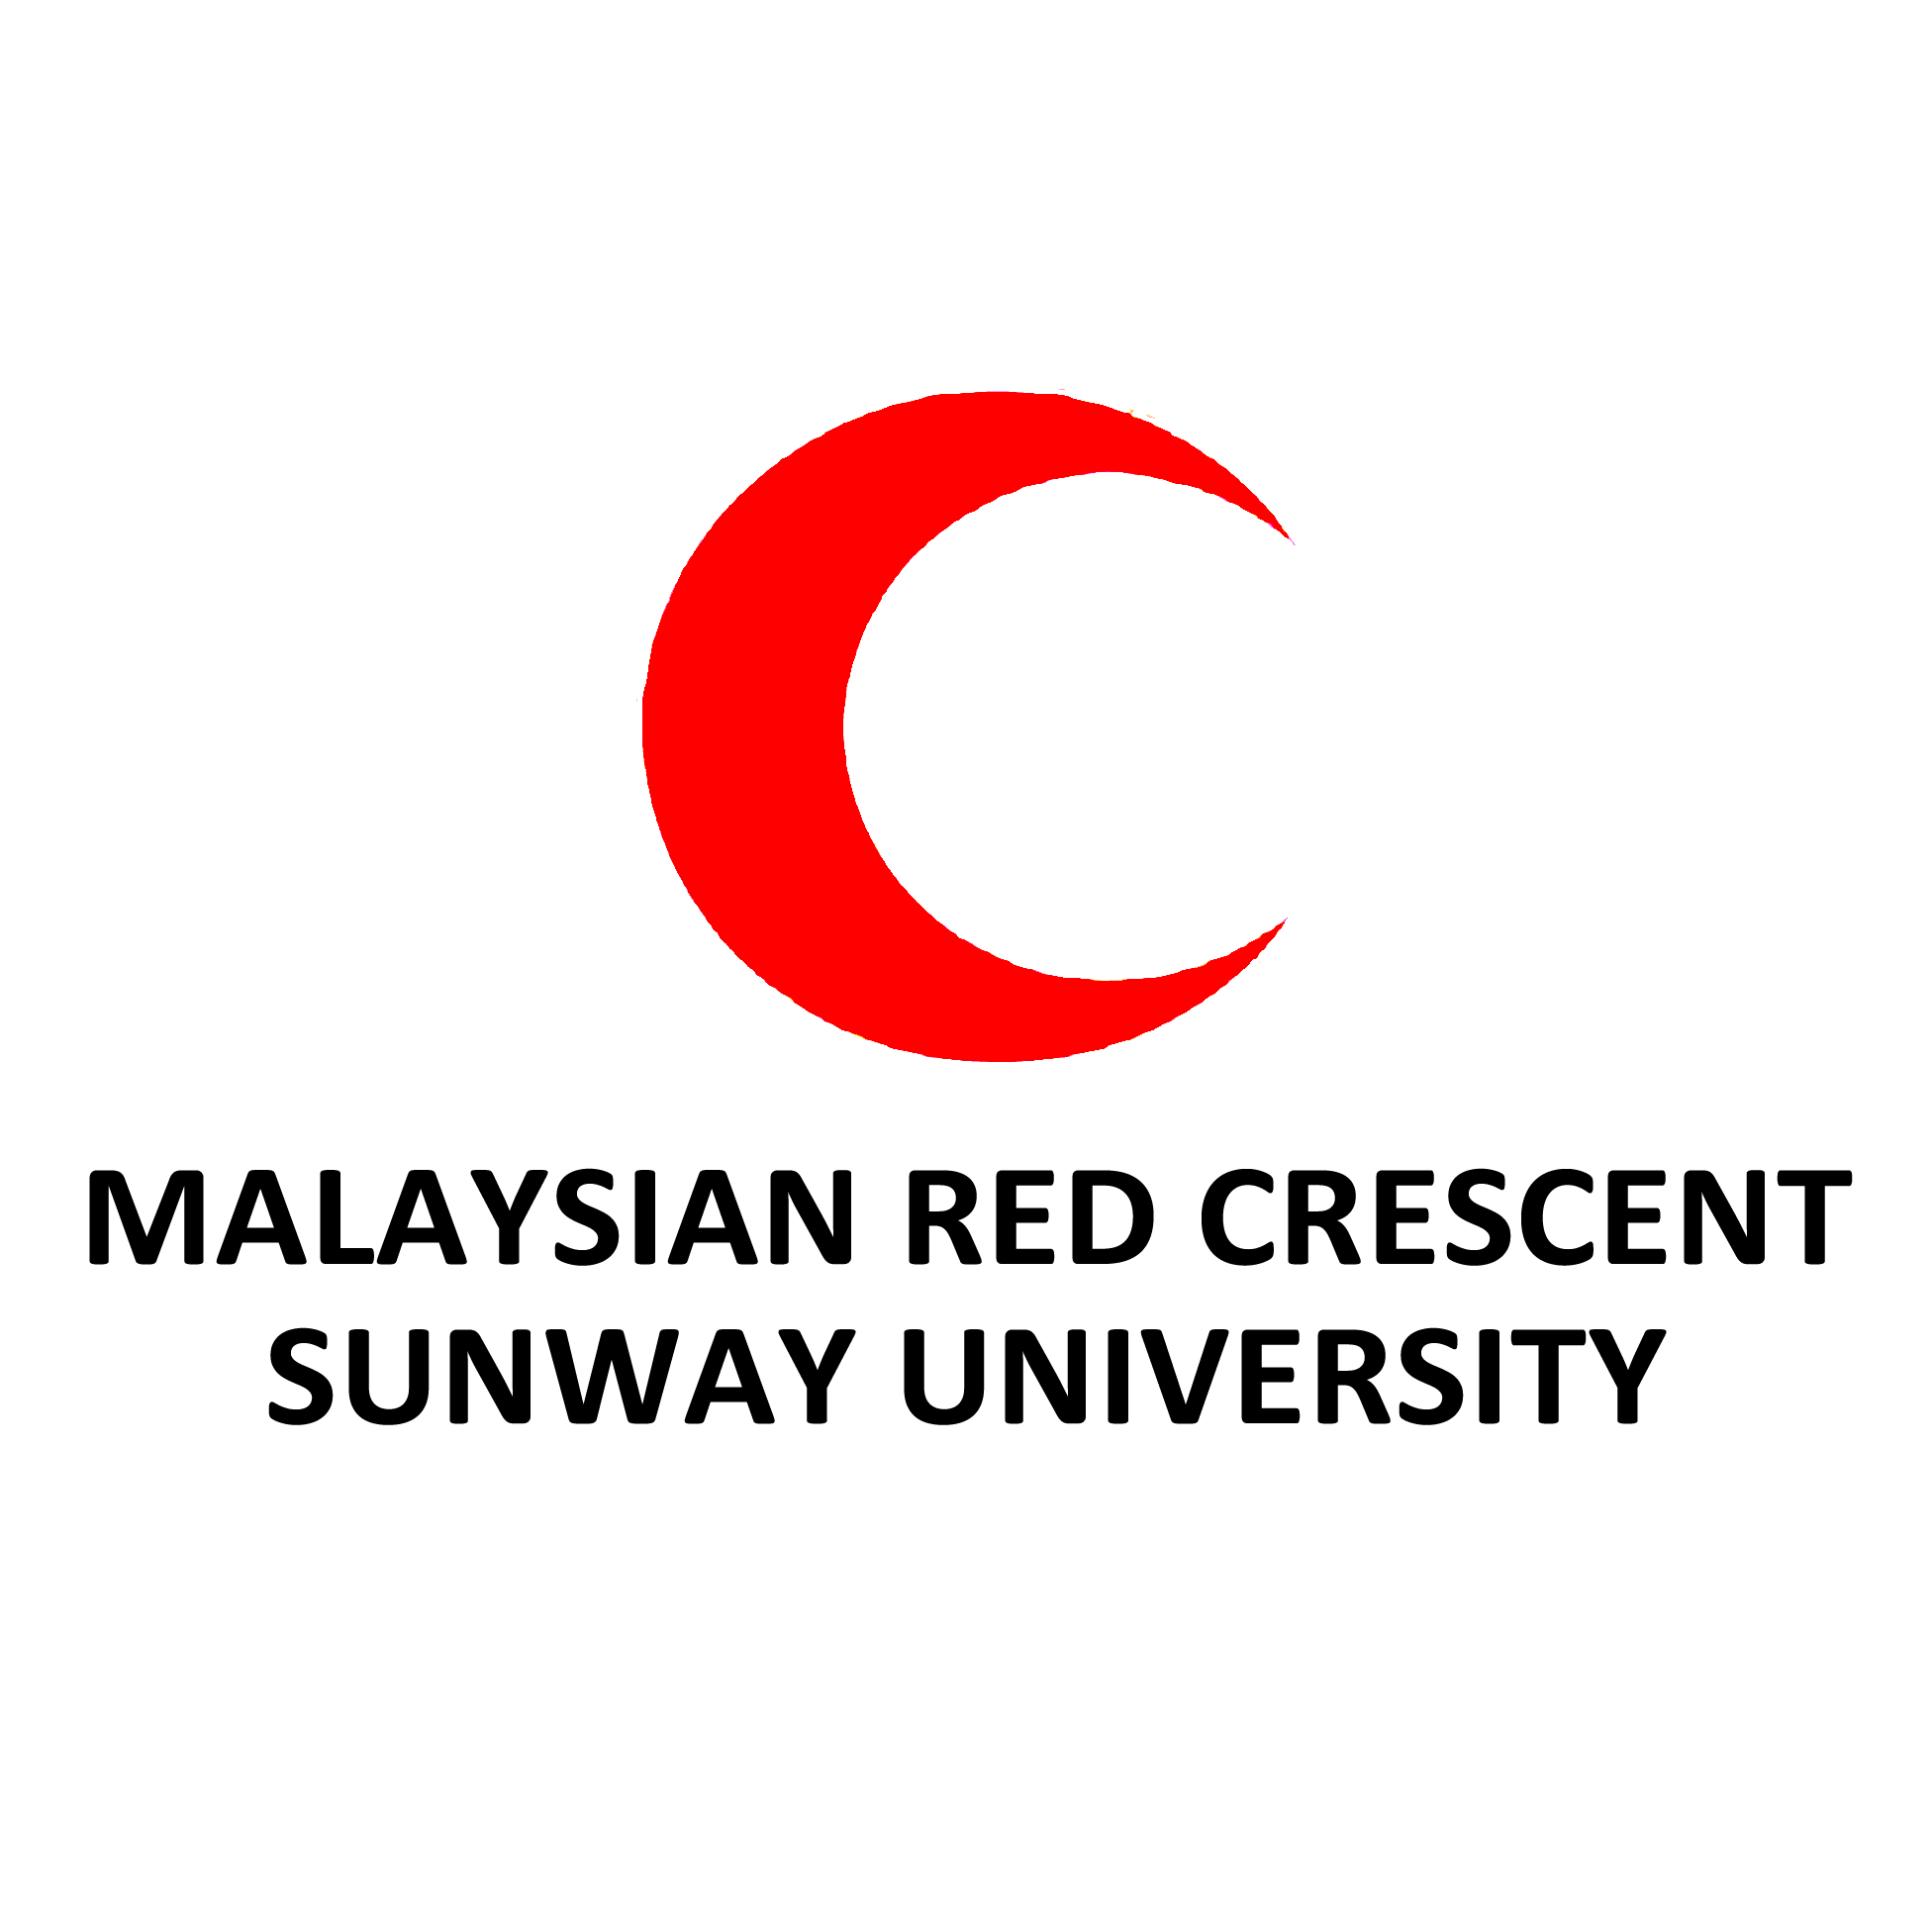 Malaysia Red Crescent of Sunway University